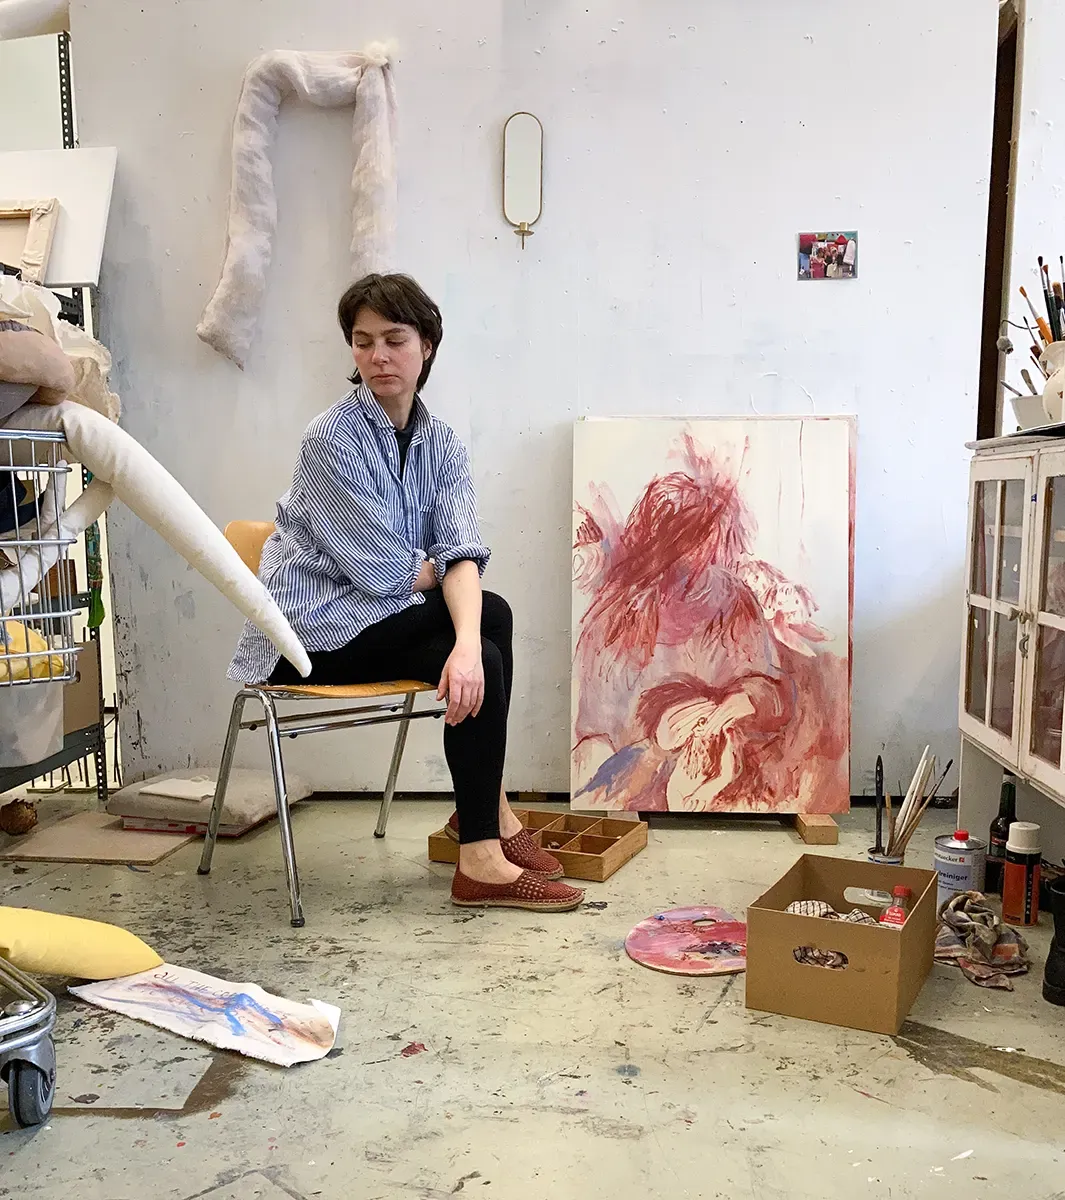 katya ovechkina, in her studio, an article of new faces in contemporary art observatory